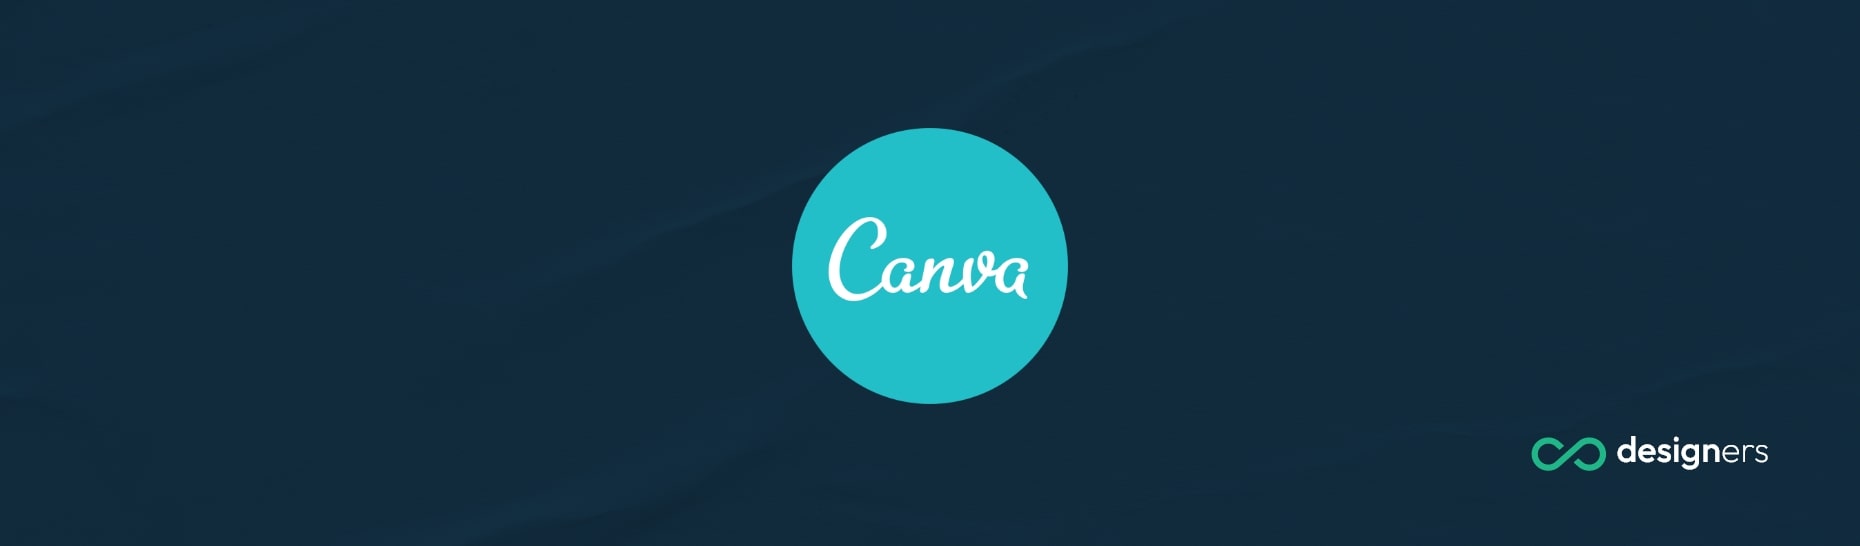 What Is Canva Software Used For?